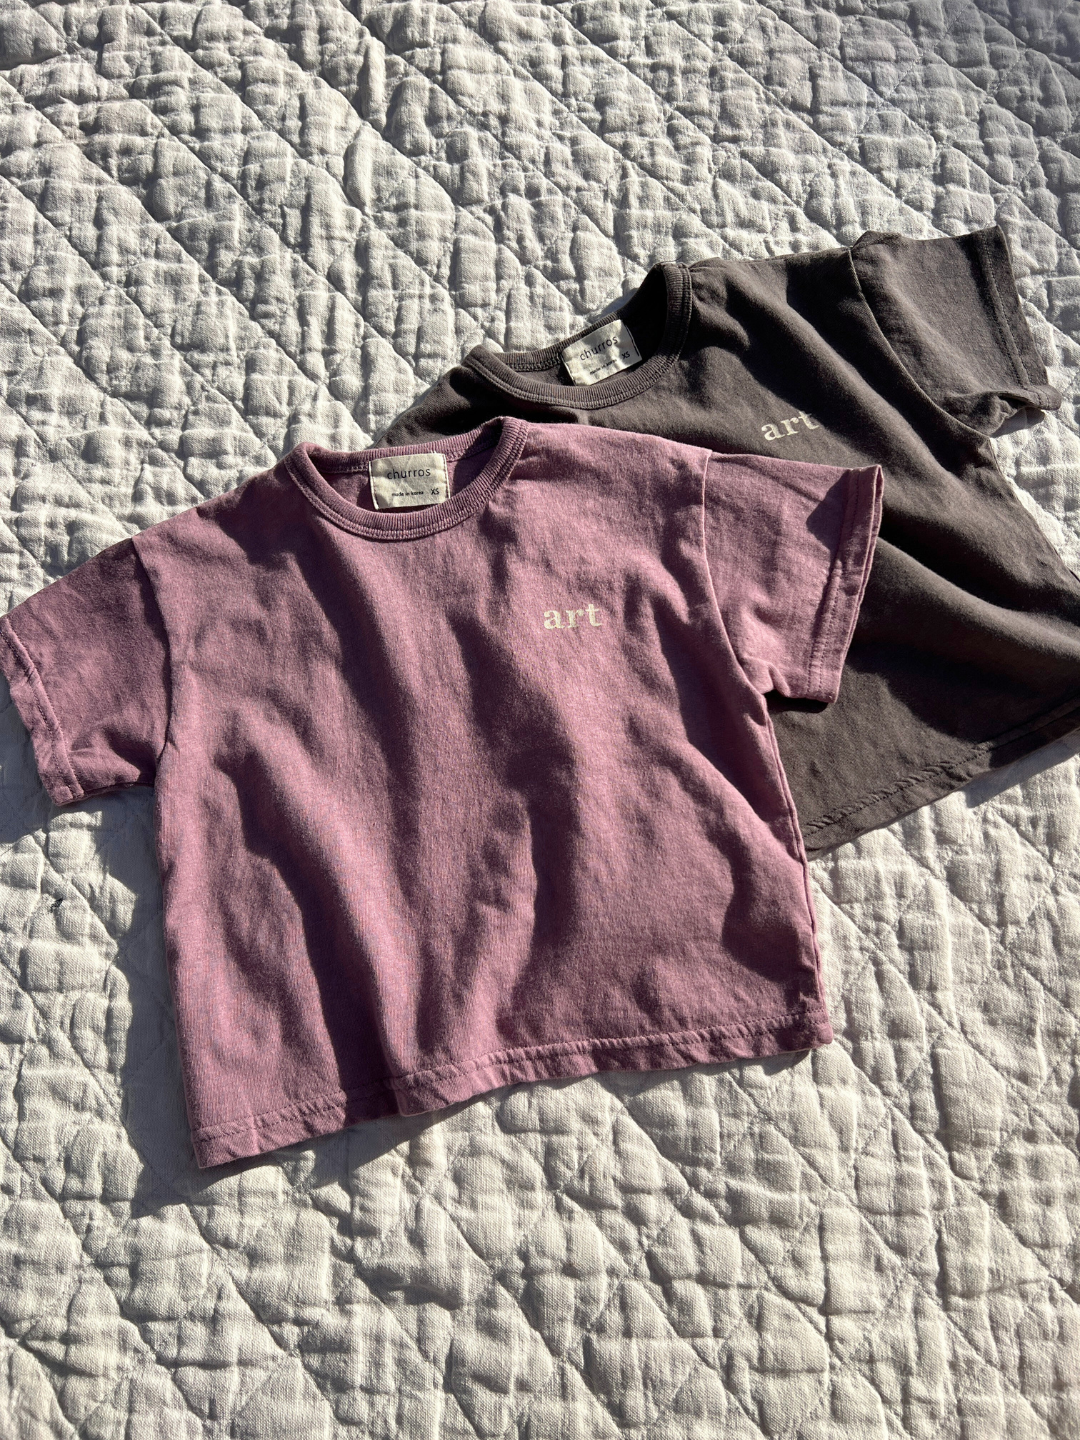 Mauve | Two kids' Studio tees laid flat on a quilt in the sun